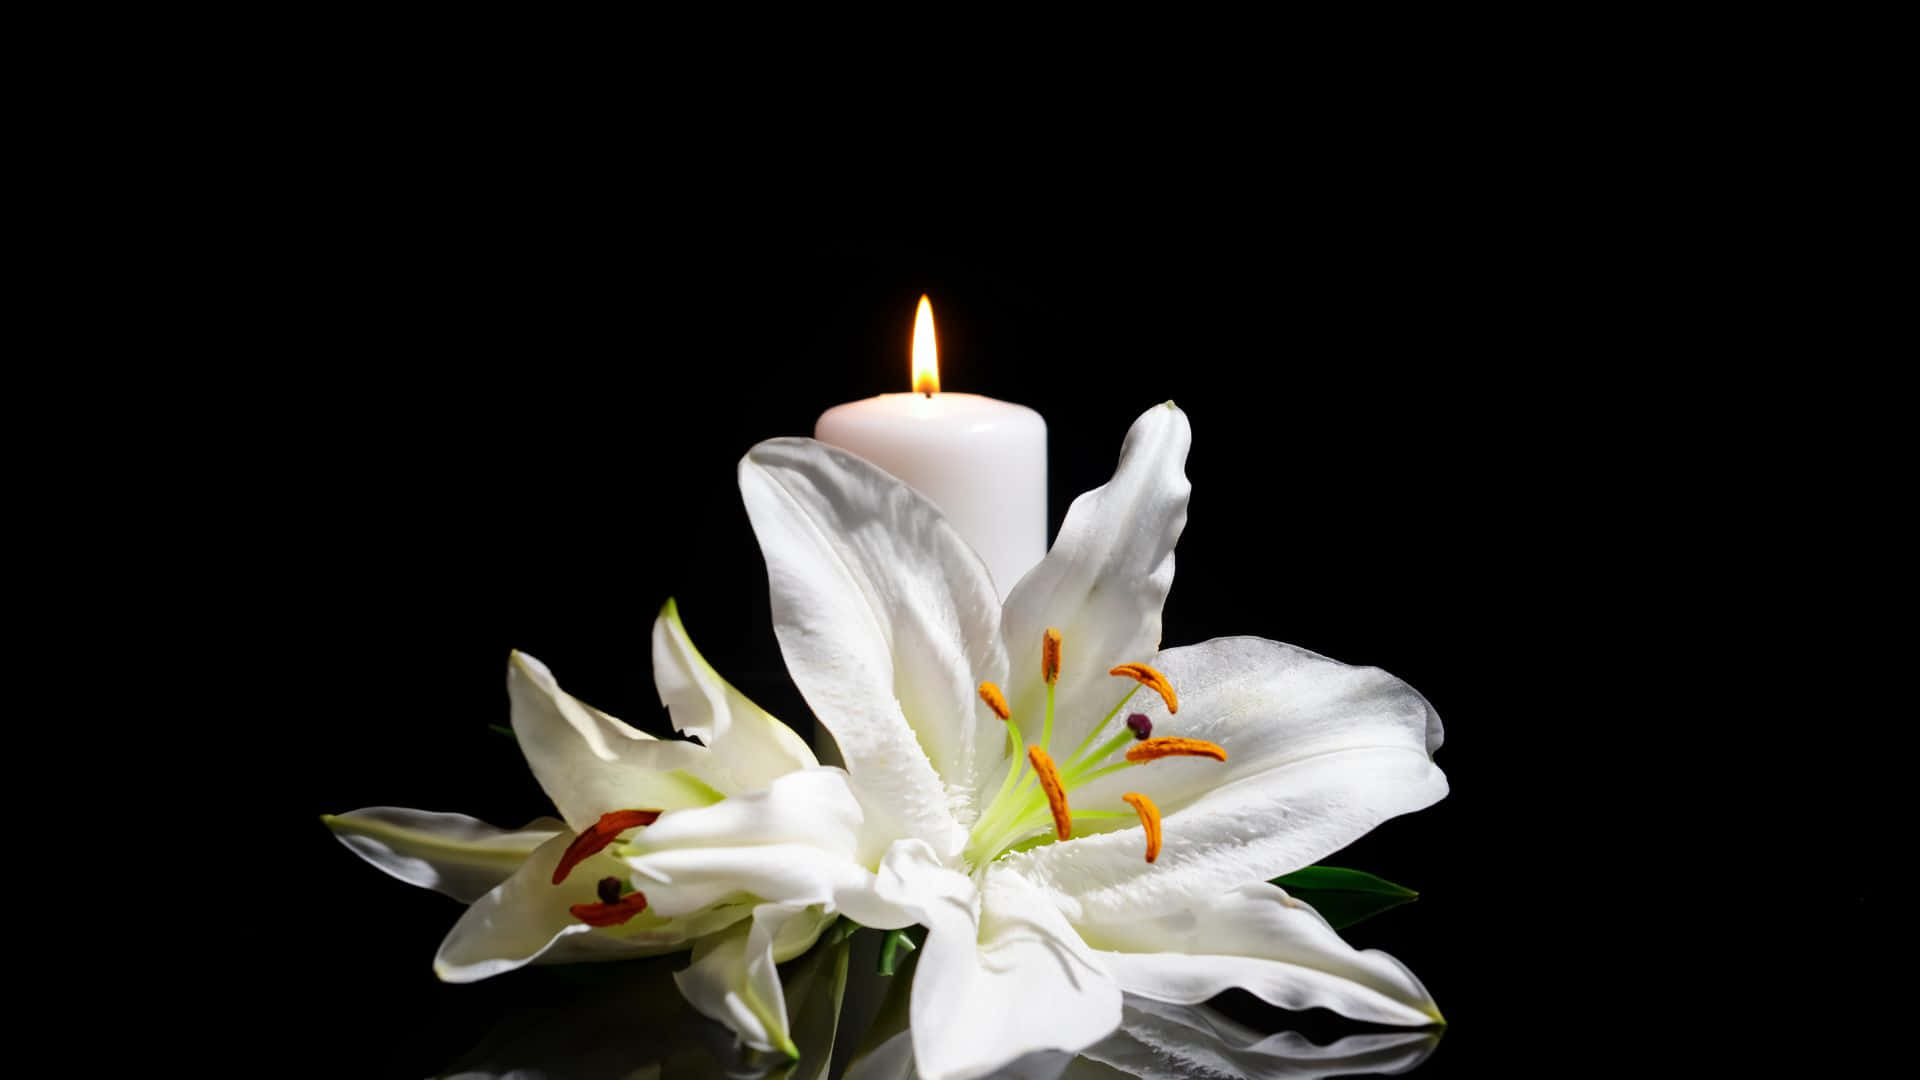 White Lily And Candle On Black Background